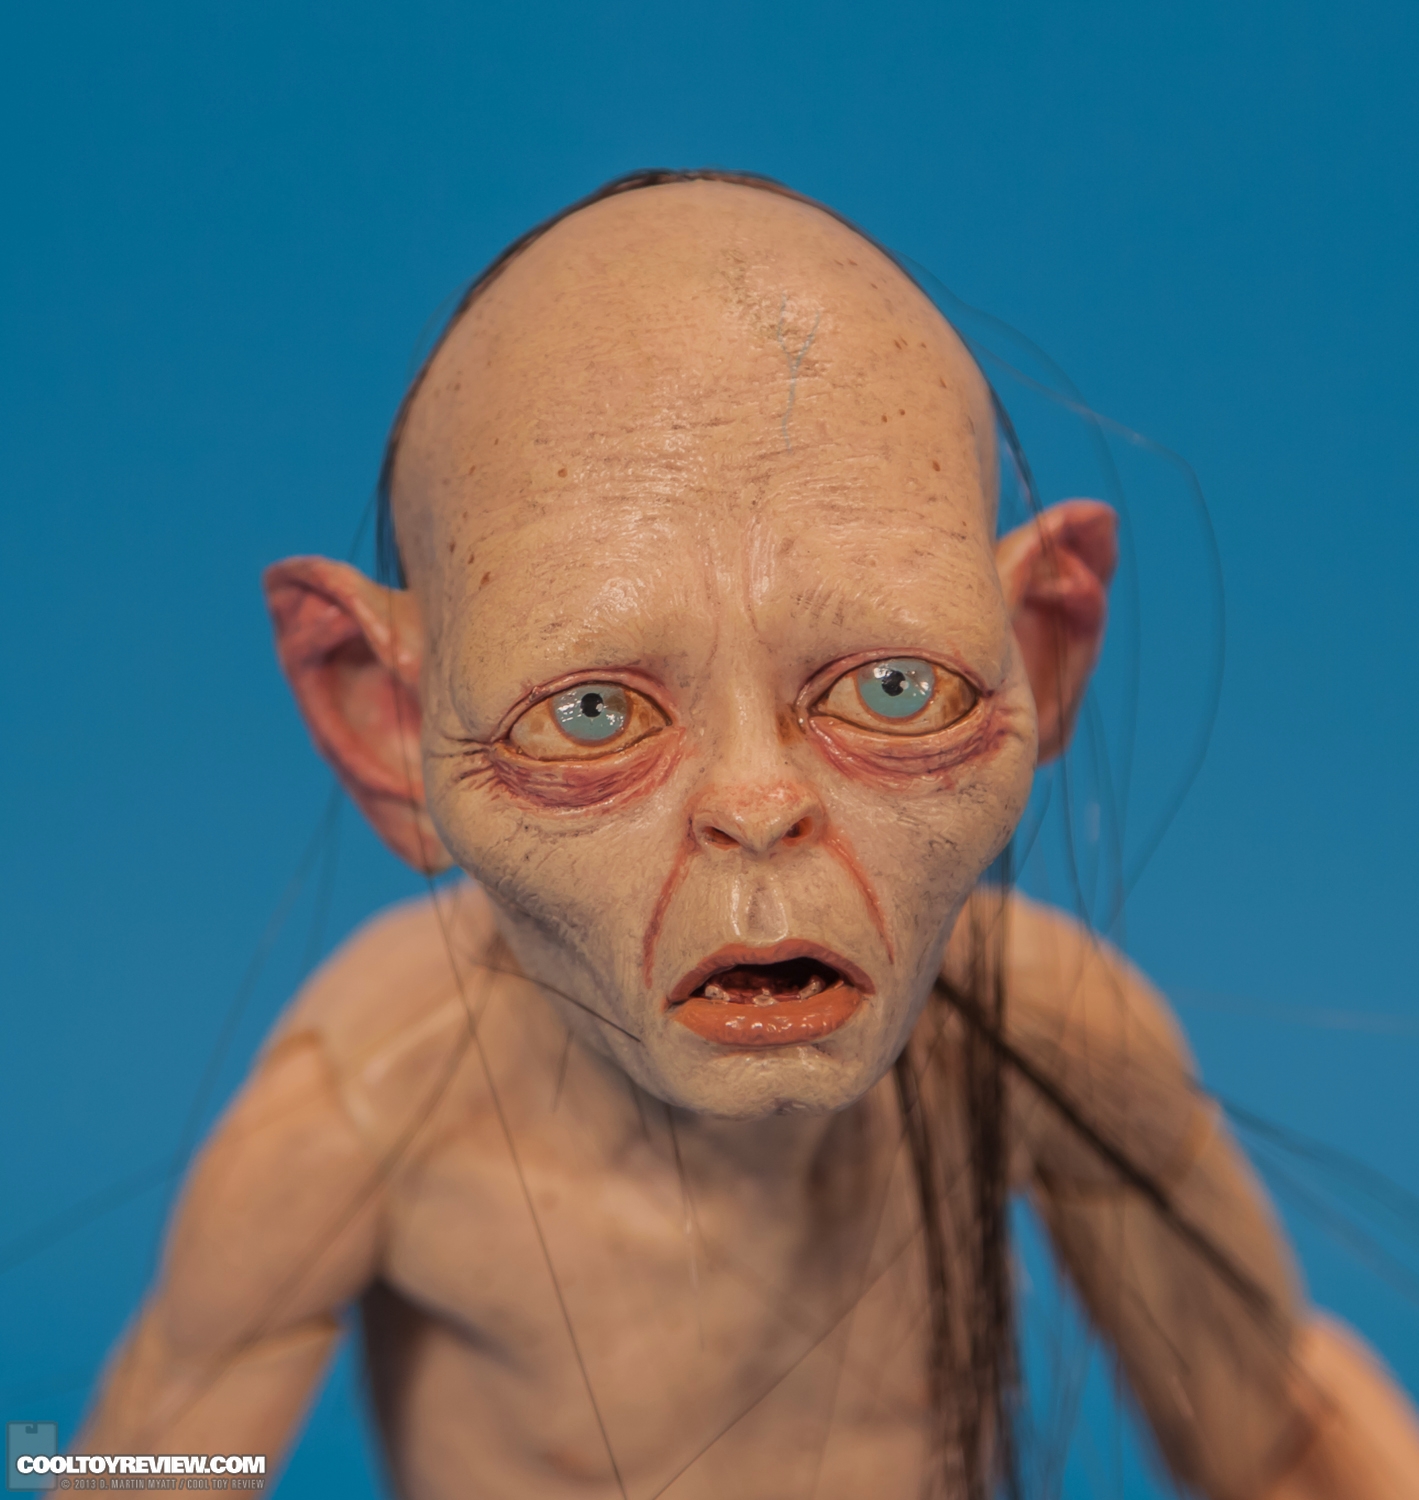 Smeagol_Lord_Of_The_Rings_NECA-009.jpg